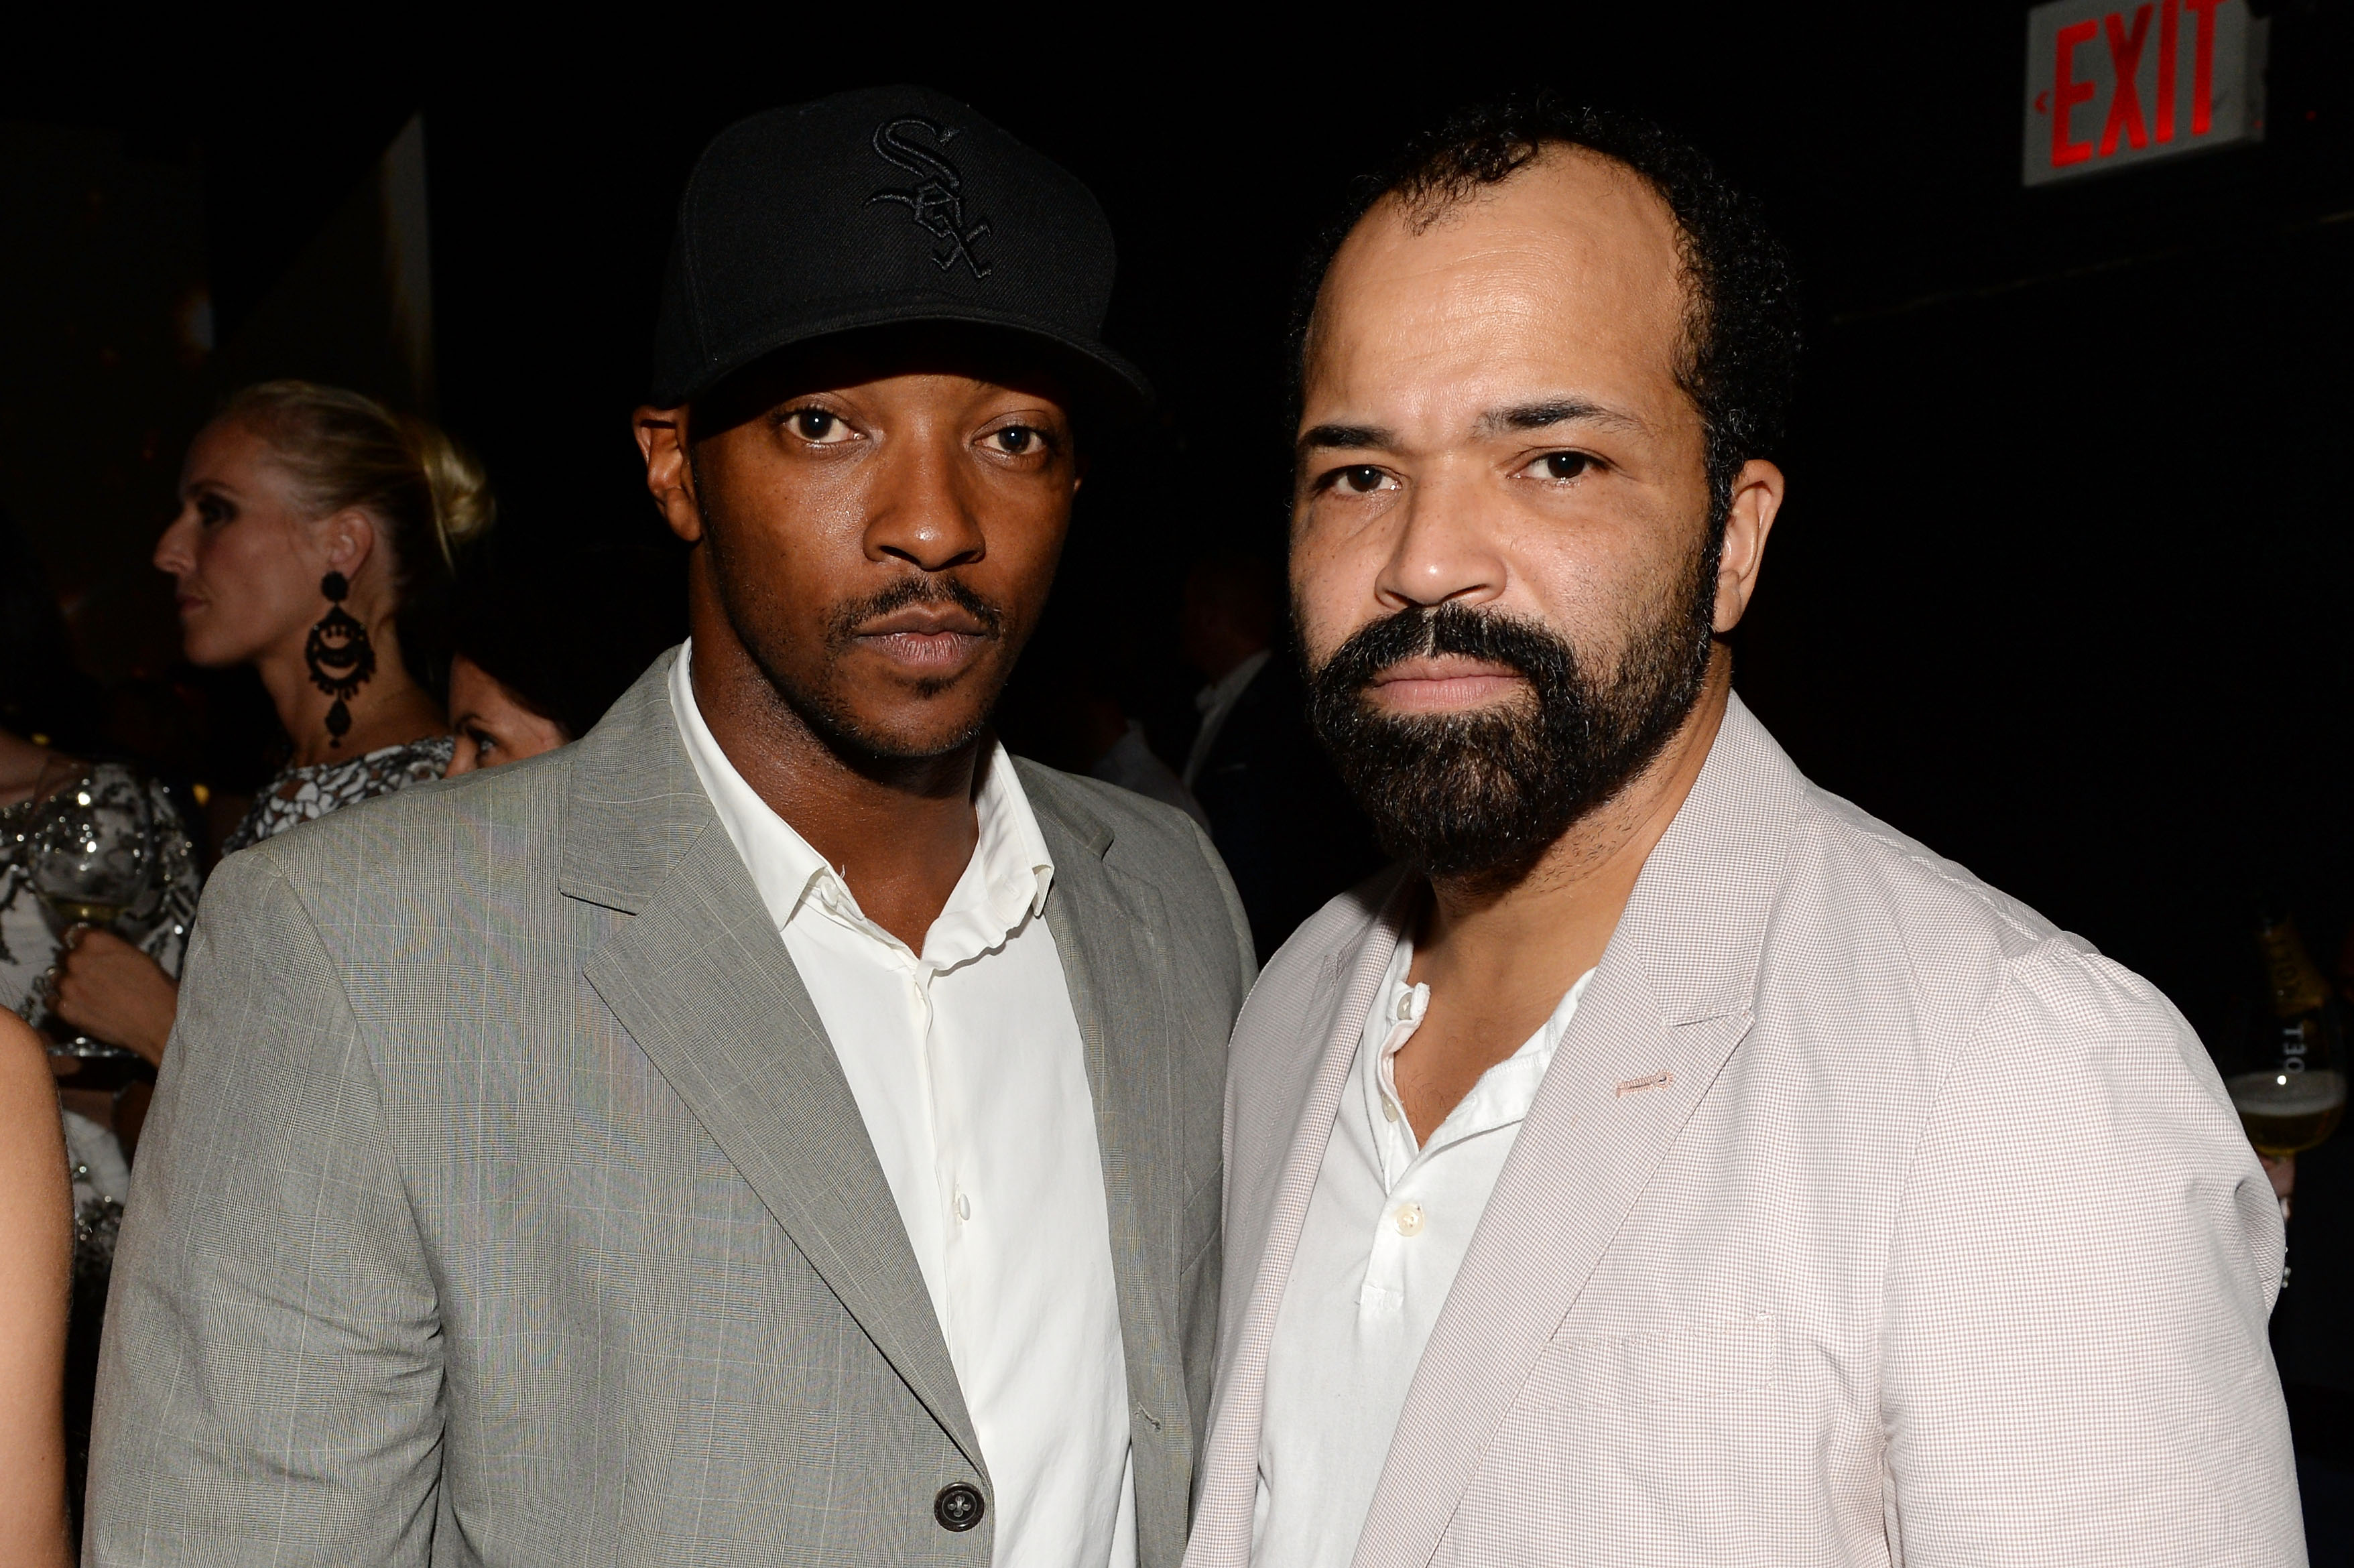 NEW YORK, NY - AUGUST 20:  Anthony Mackie (L) and Jeffrey Wright attend Moet & Chandon Celebrates Its 270th Anniversary With New Global Brand Ambassador, International Tennis Champion, Roger Federer at Chelsea Piers Sports Center on August 20, 2013 in New York City.  (Photo by Andrew H. Walker/Getty Images for Moet & Chandon)